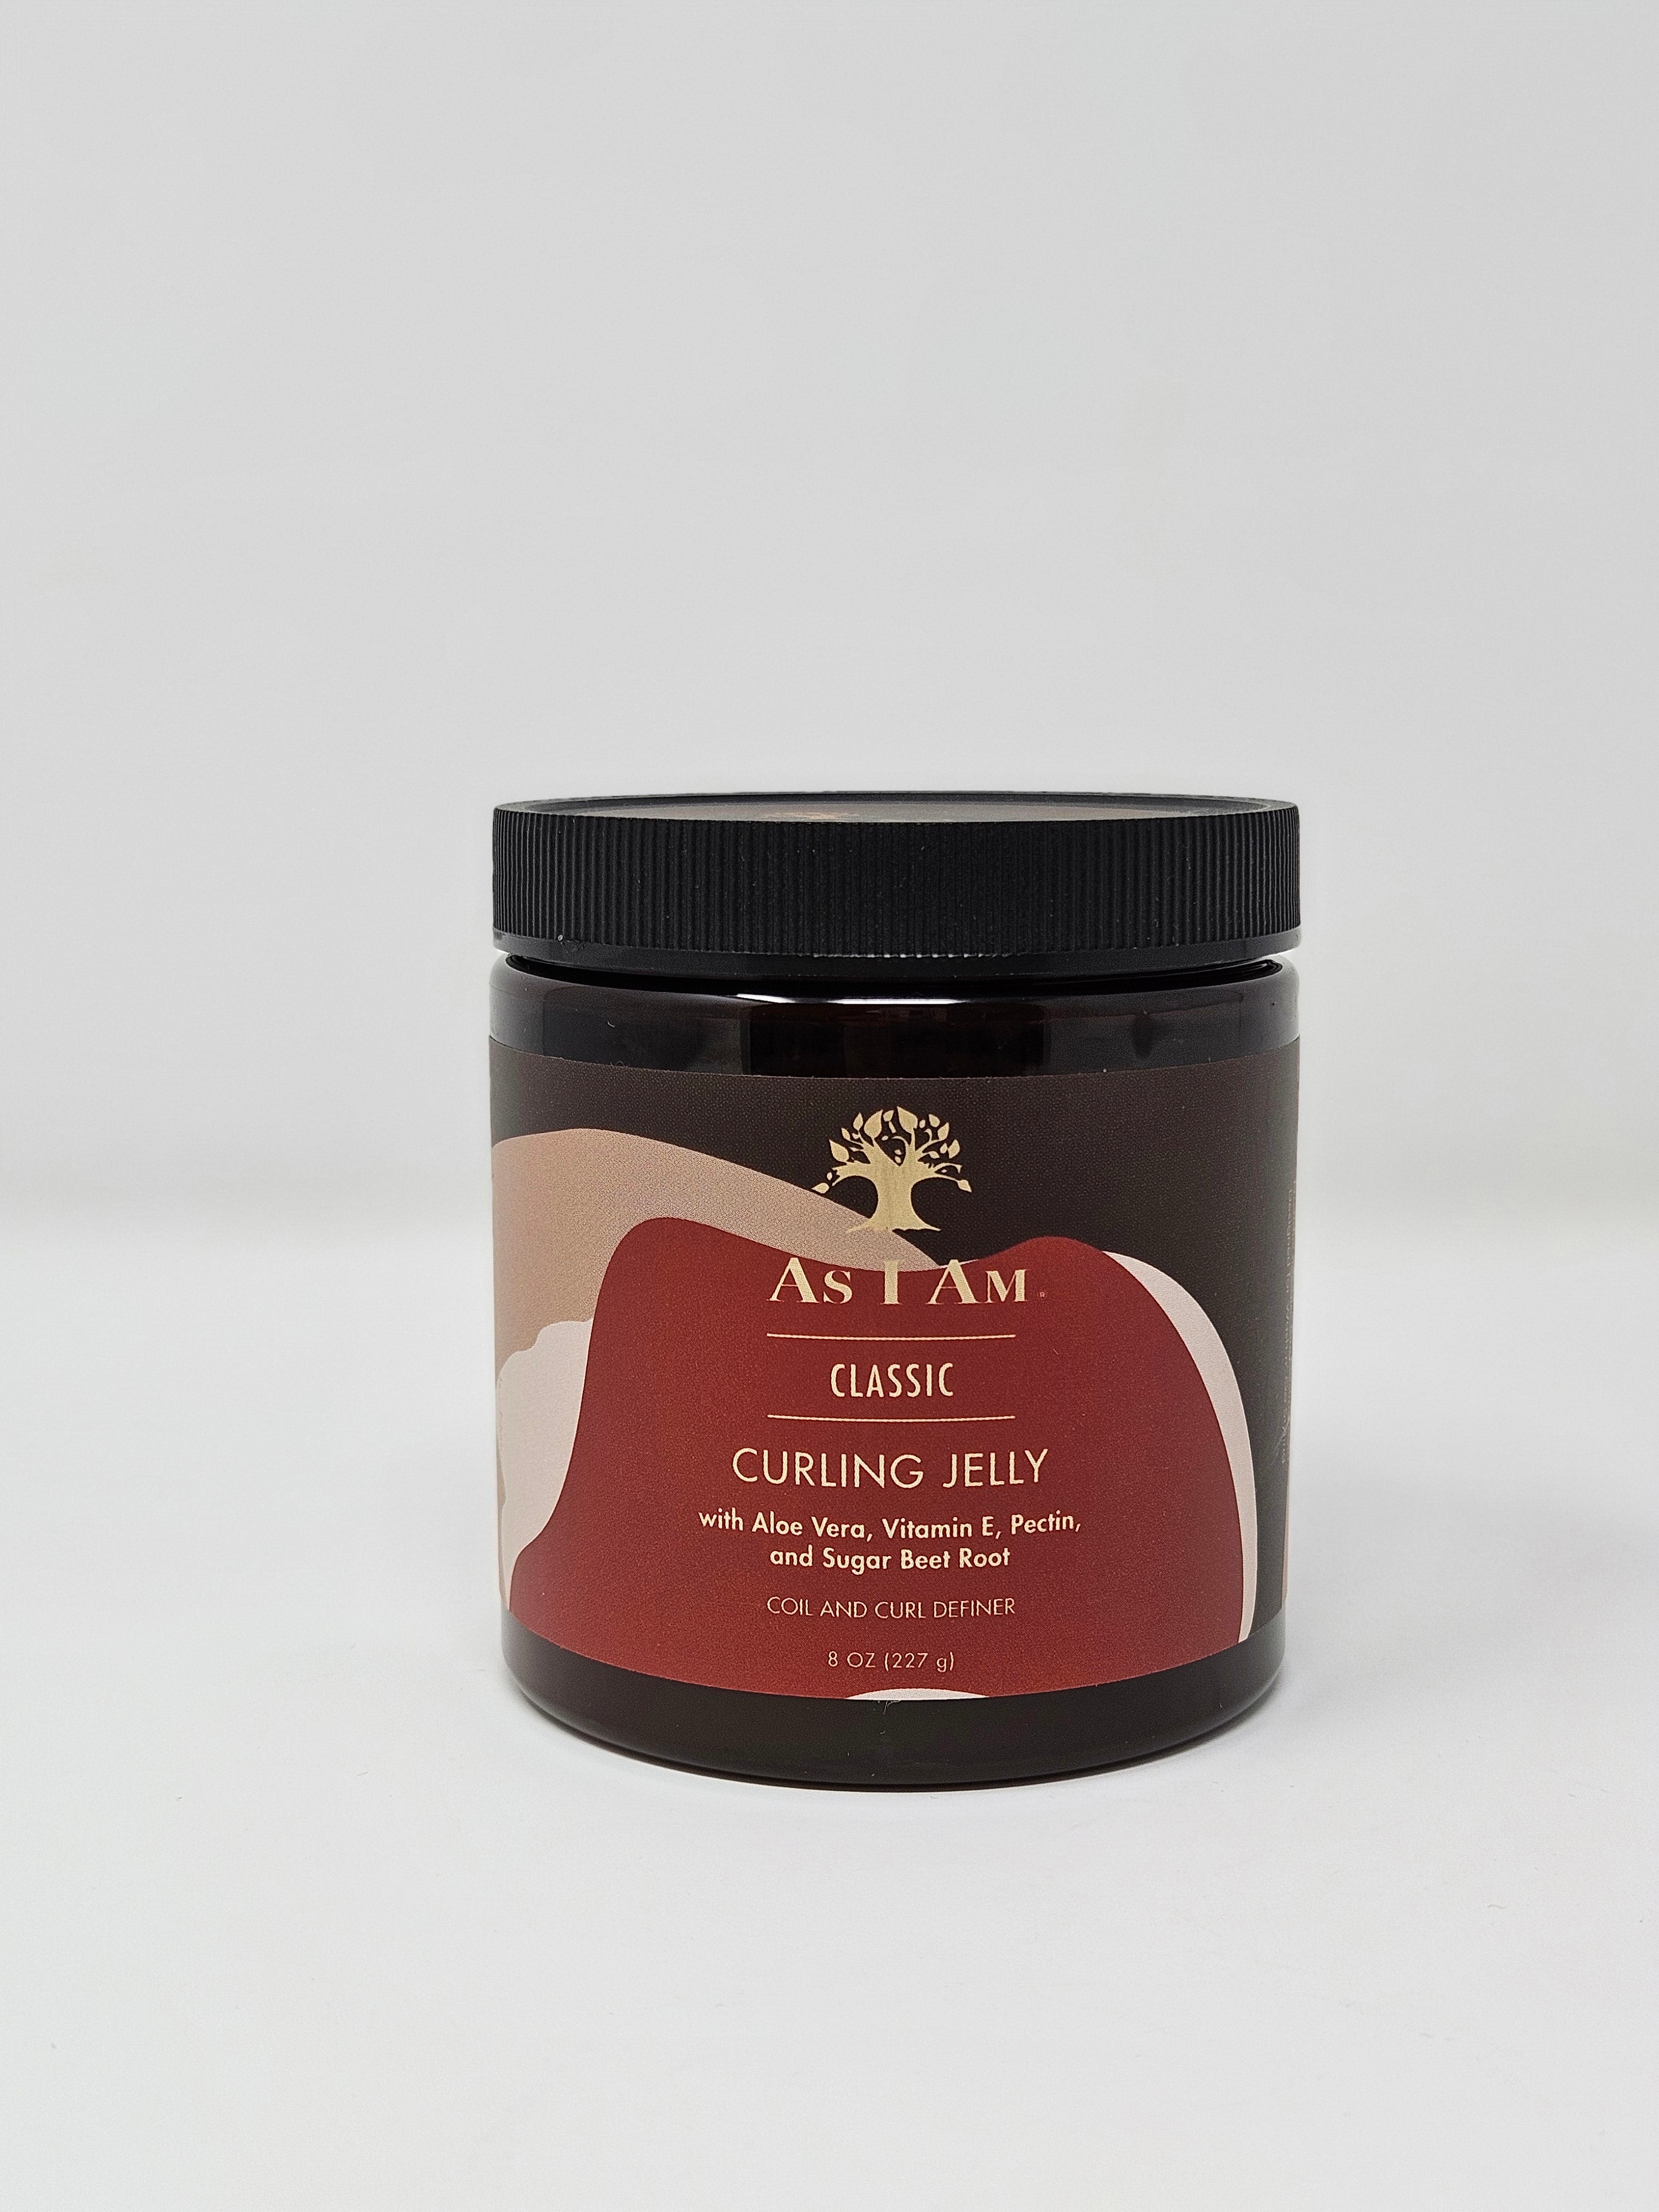 As I Am Classic Curling Jelly - 8oz